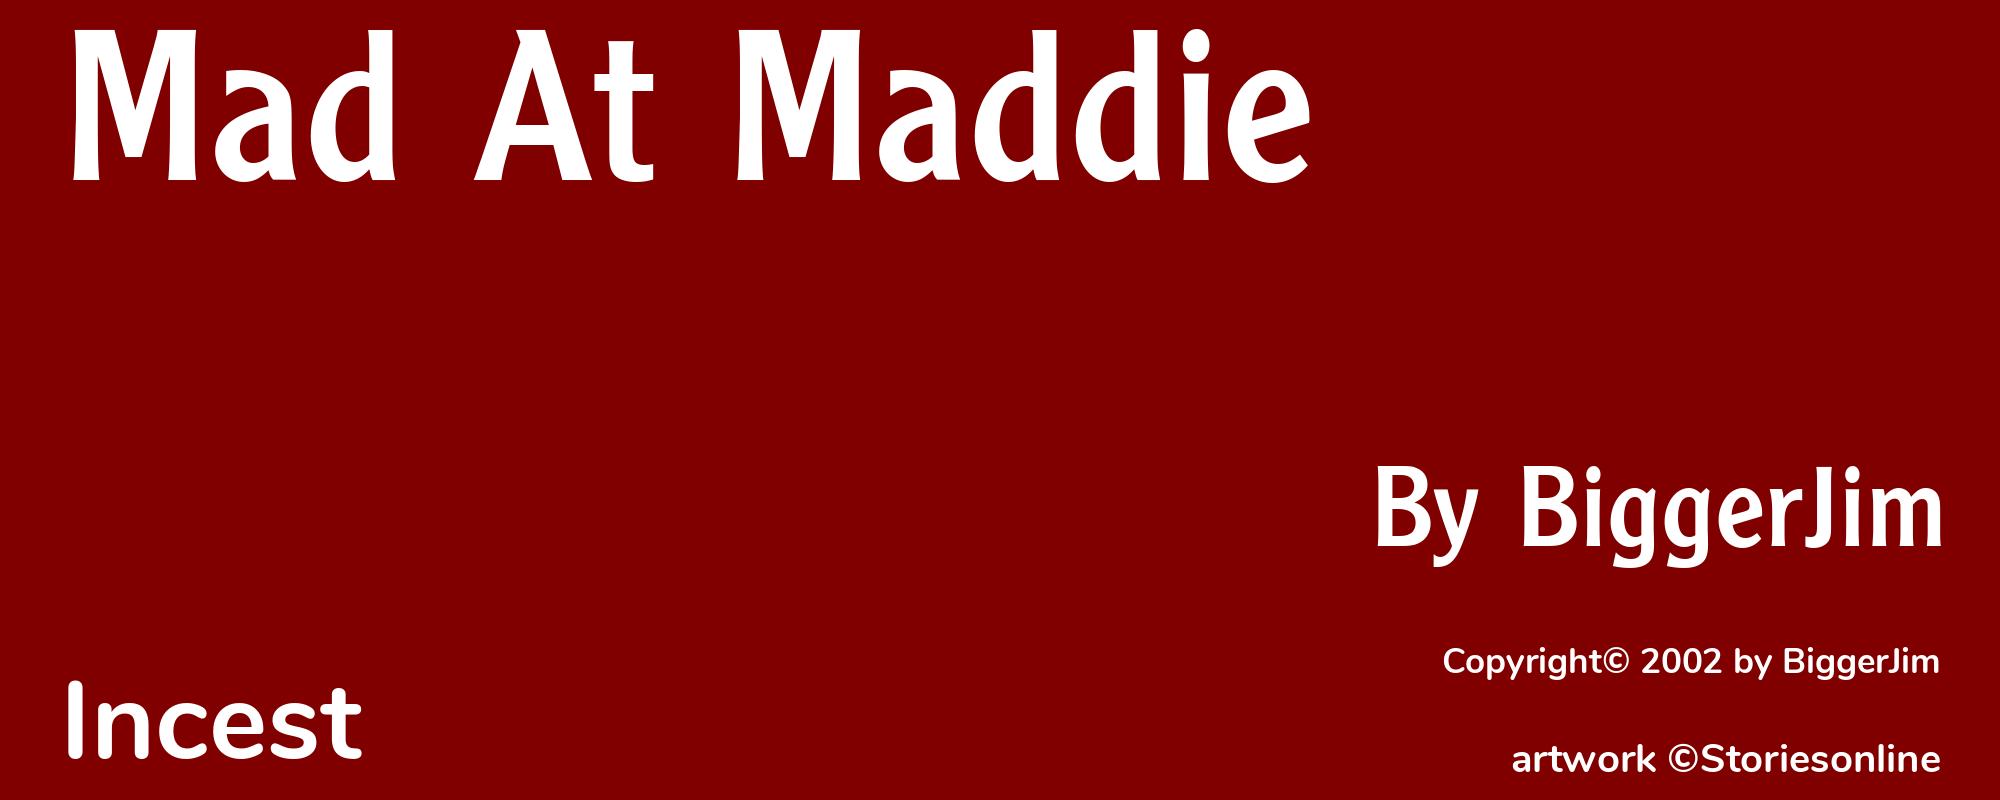 Mad At Maddie - Cover